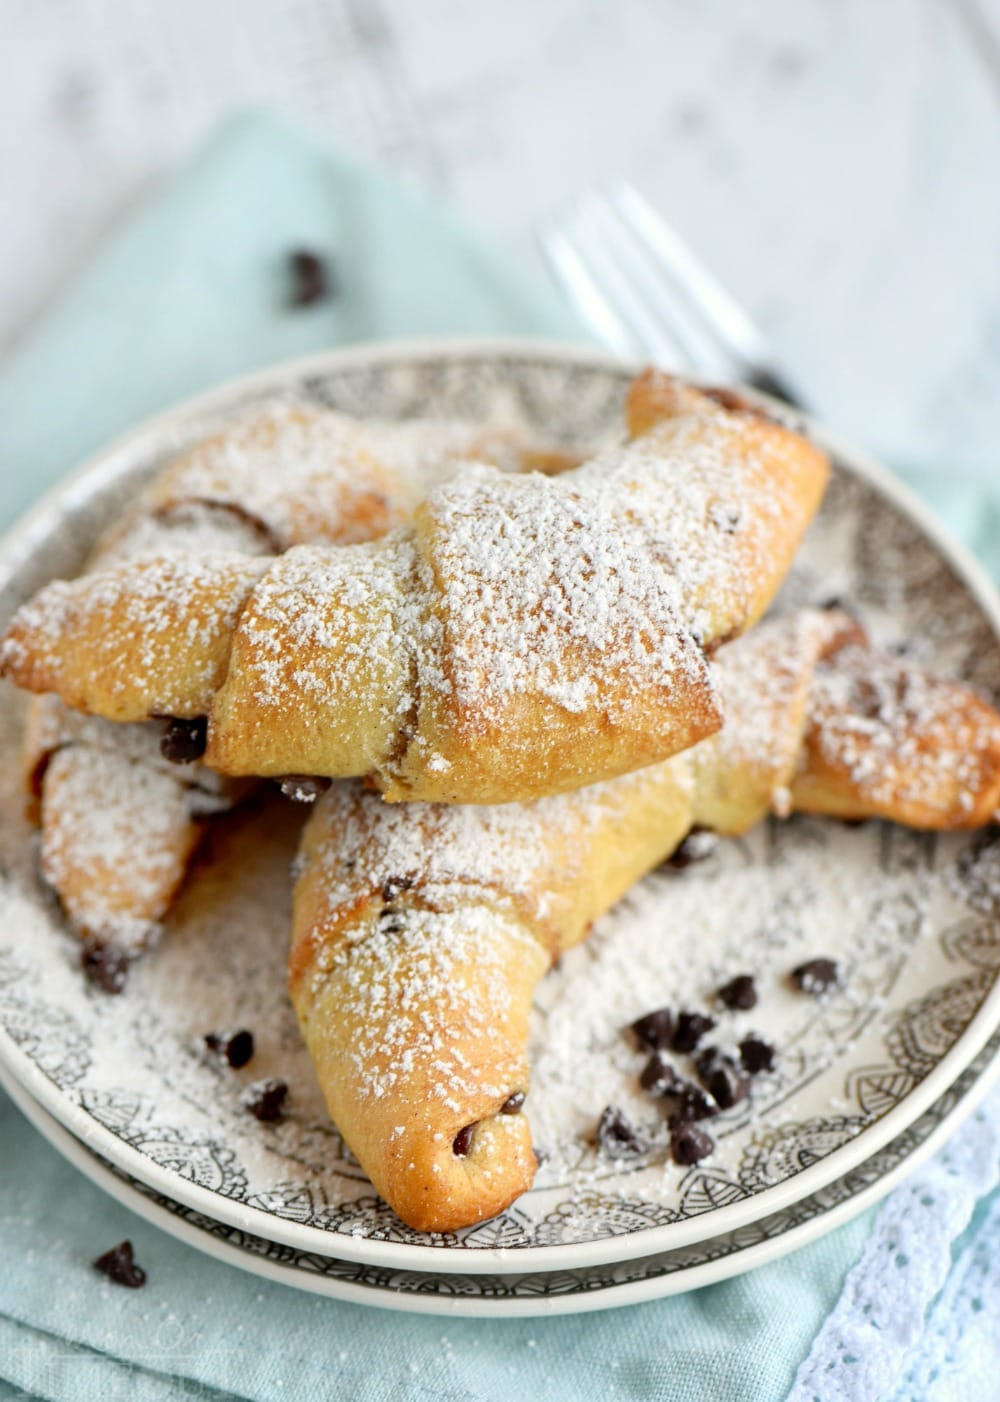 These Easy Chocolate Crescents take just minutes to prepare and use only 4 ingredients! Top with a sweet dusting of powdered sugar and you'll find them hard to resist. Great for breakfast, brunch, or dessert! // Mom On Timeout